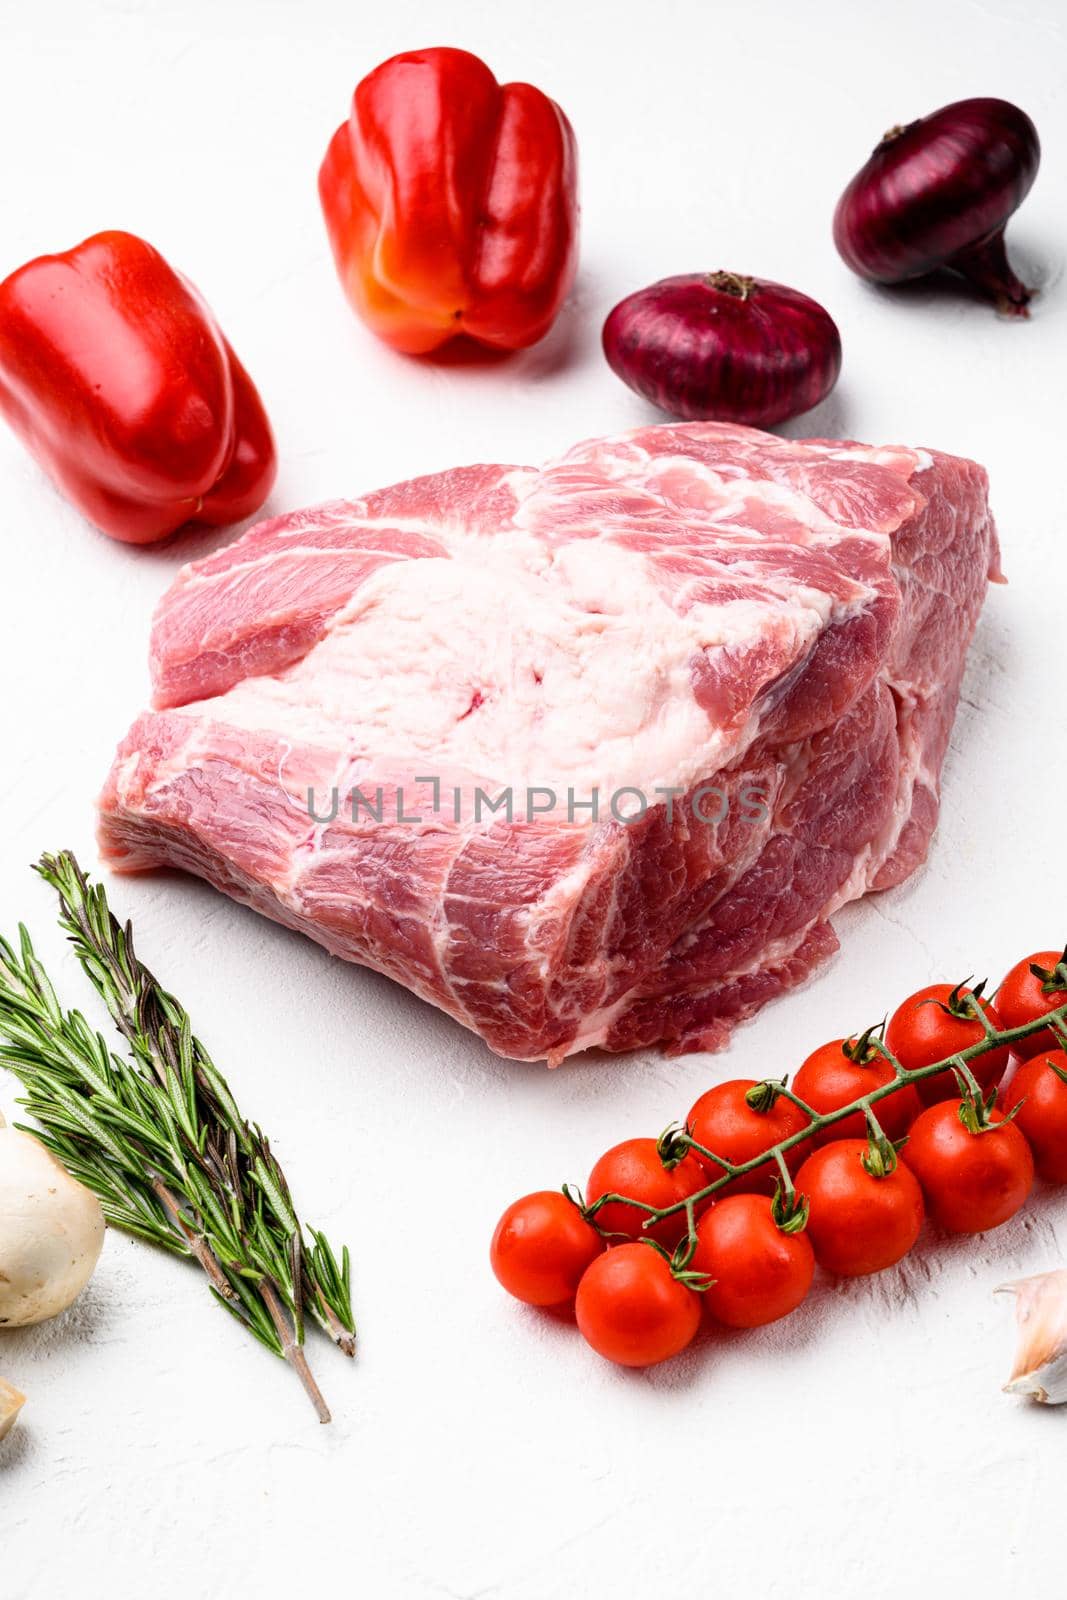 Pork meat raw neck, with ingredients and herbs, on white stone table background by Ilianesolenyi